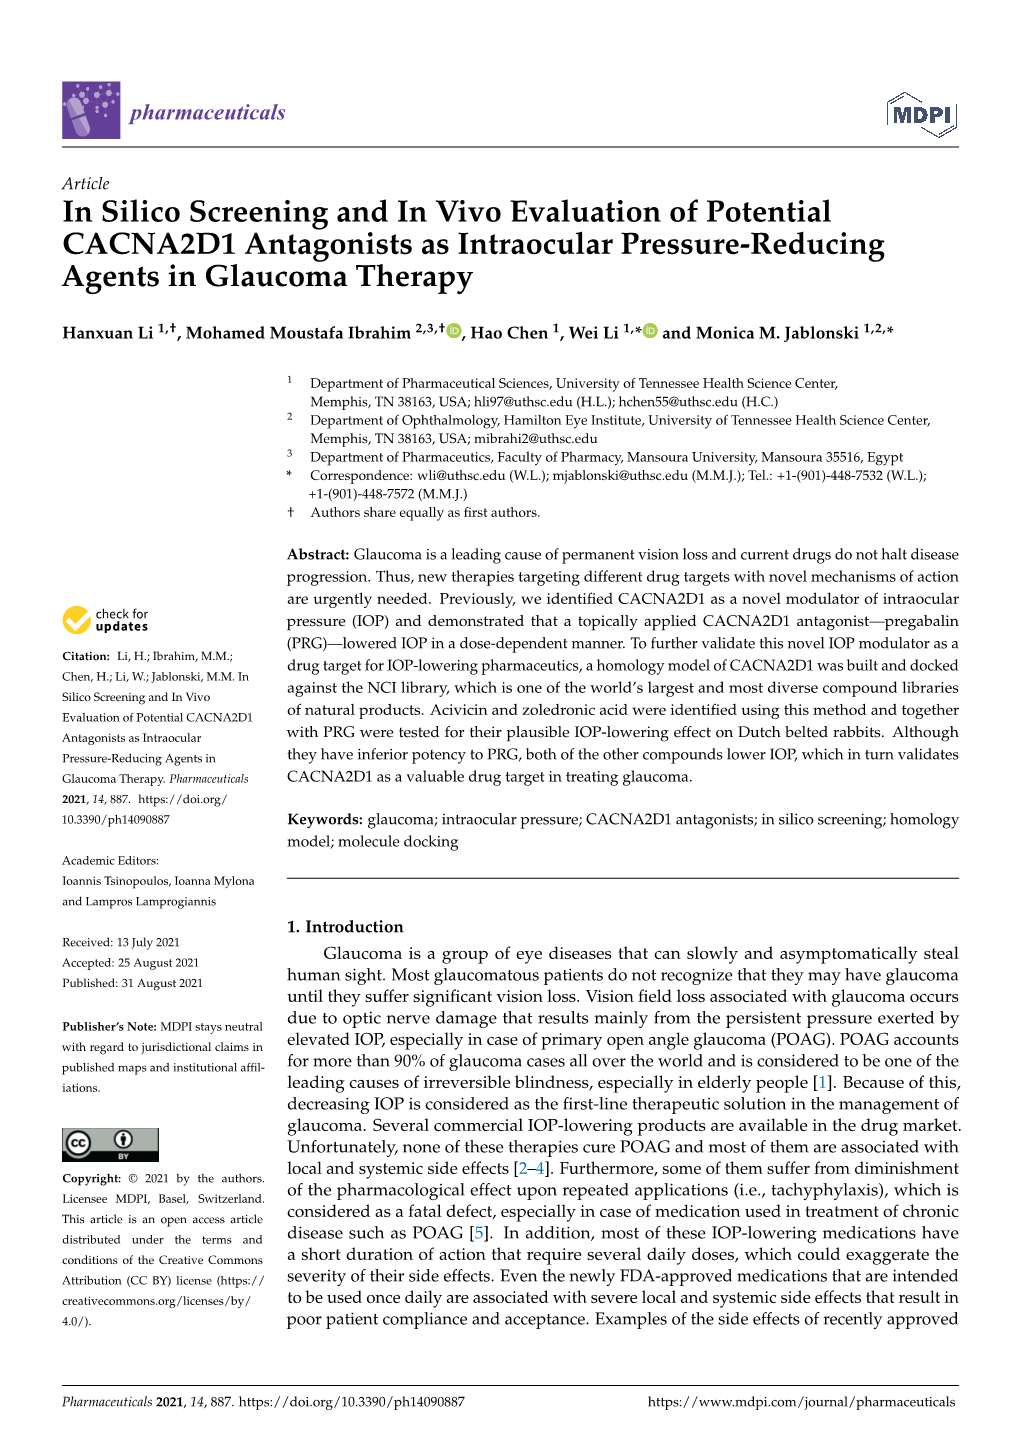 In Silico Screening and in Vivo Evaluation of Potential CACNA2D1 Antagonists As Intraocular Pressure-Reducing Agents in Glaucoma Therapy